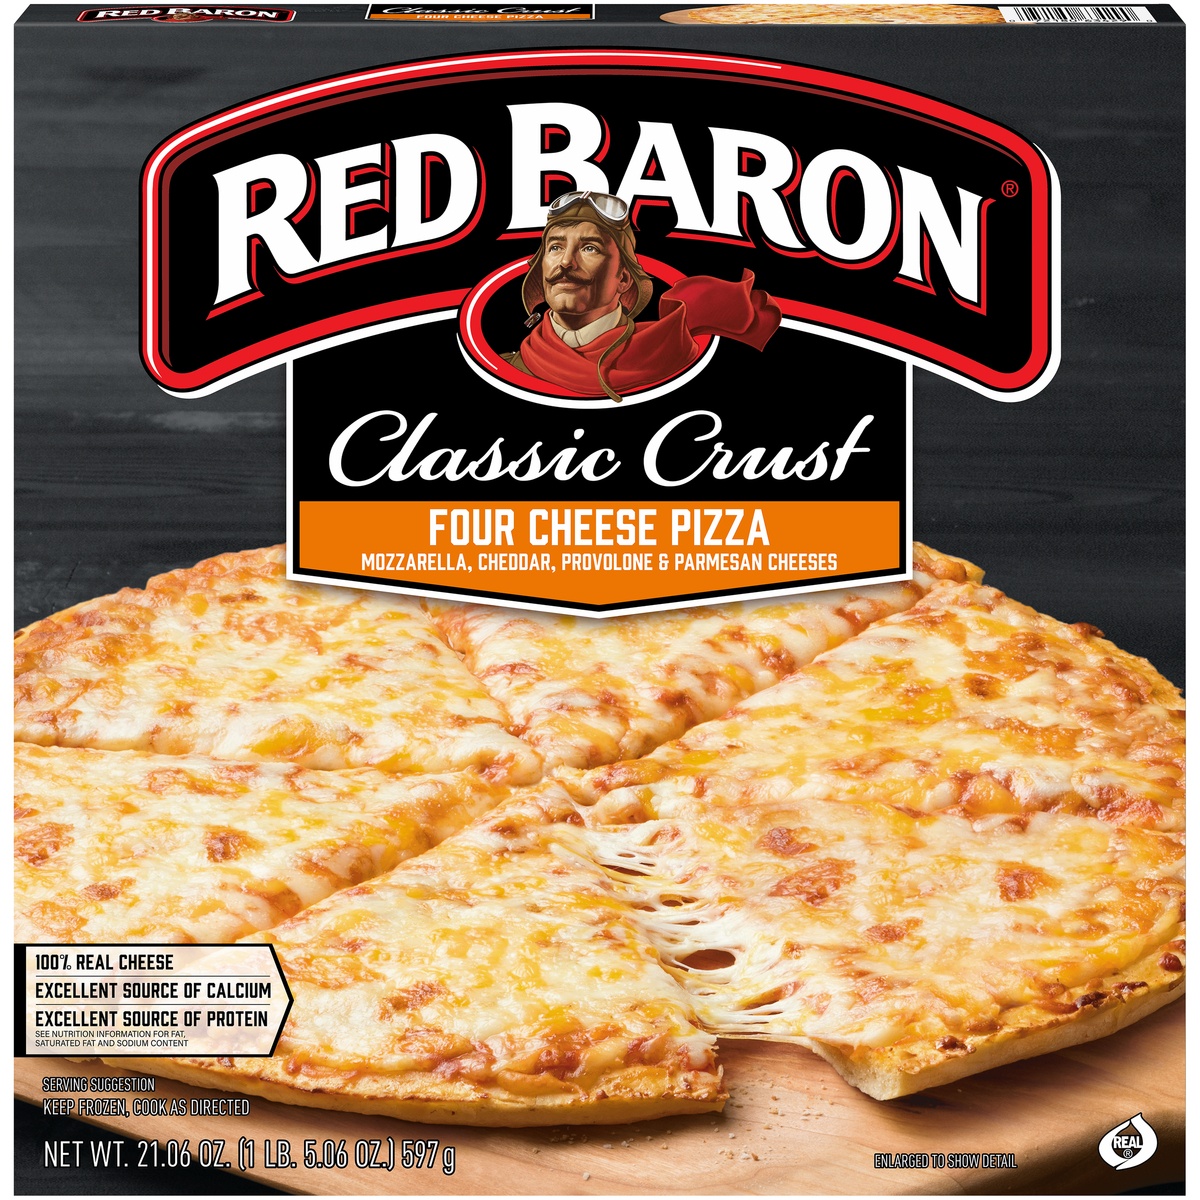 slide 1 of 11, Red Baron Classic Crust Four Cheese Pizza, 20.66 oz